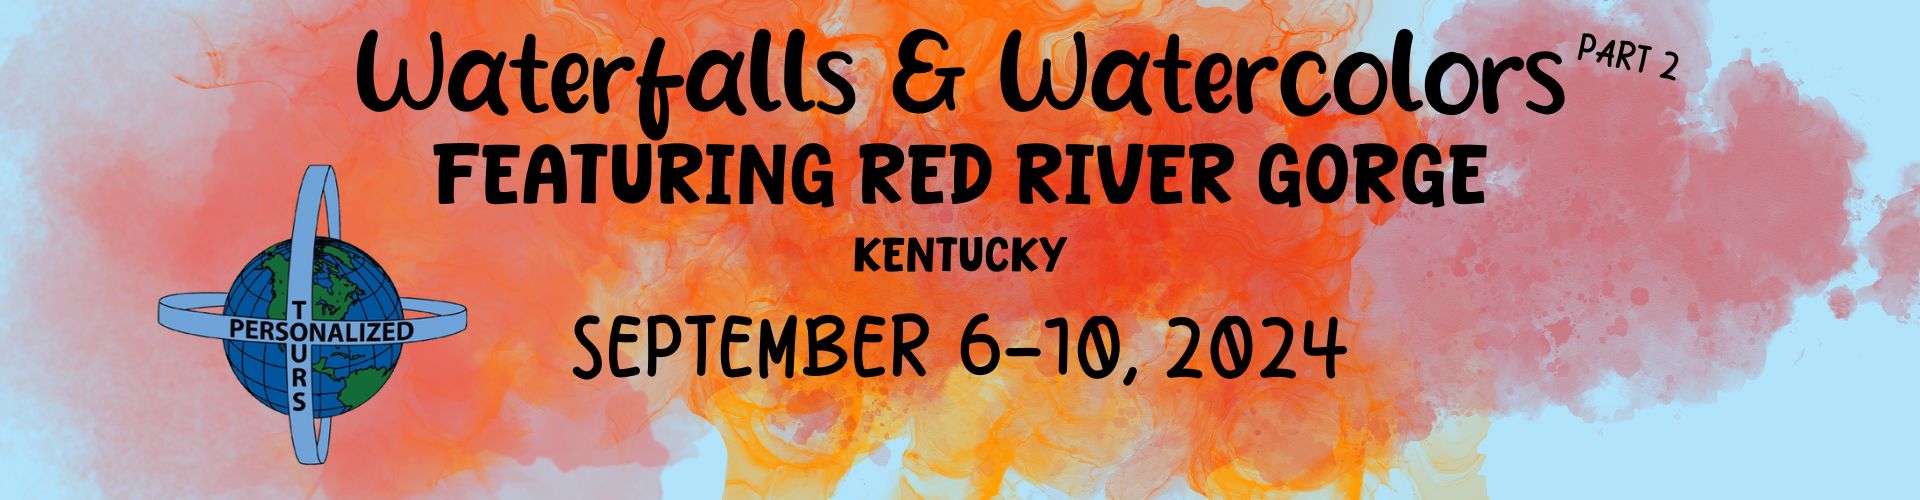 Waterfalls and Watercolors Kentucky Tour Red River Gorge